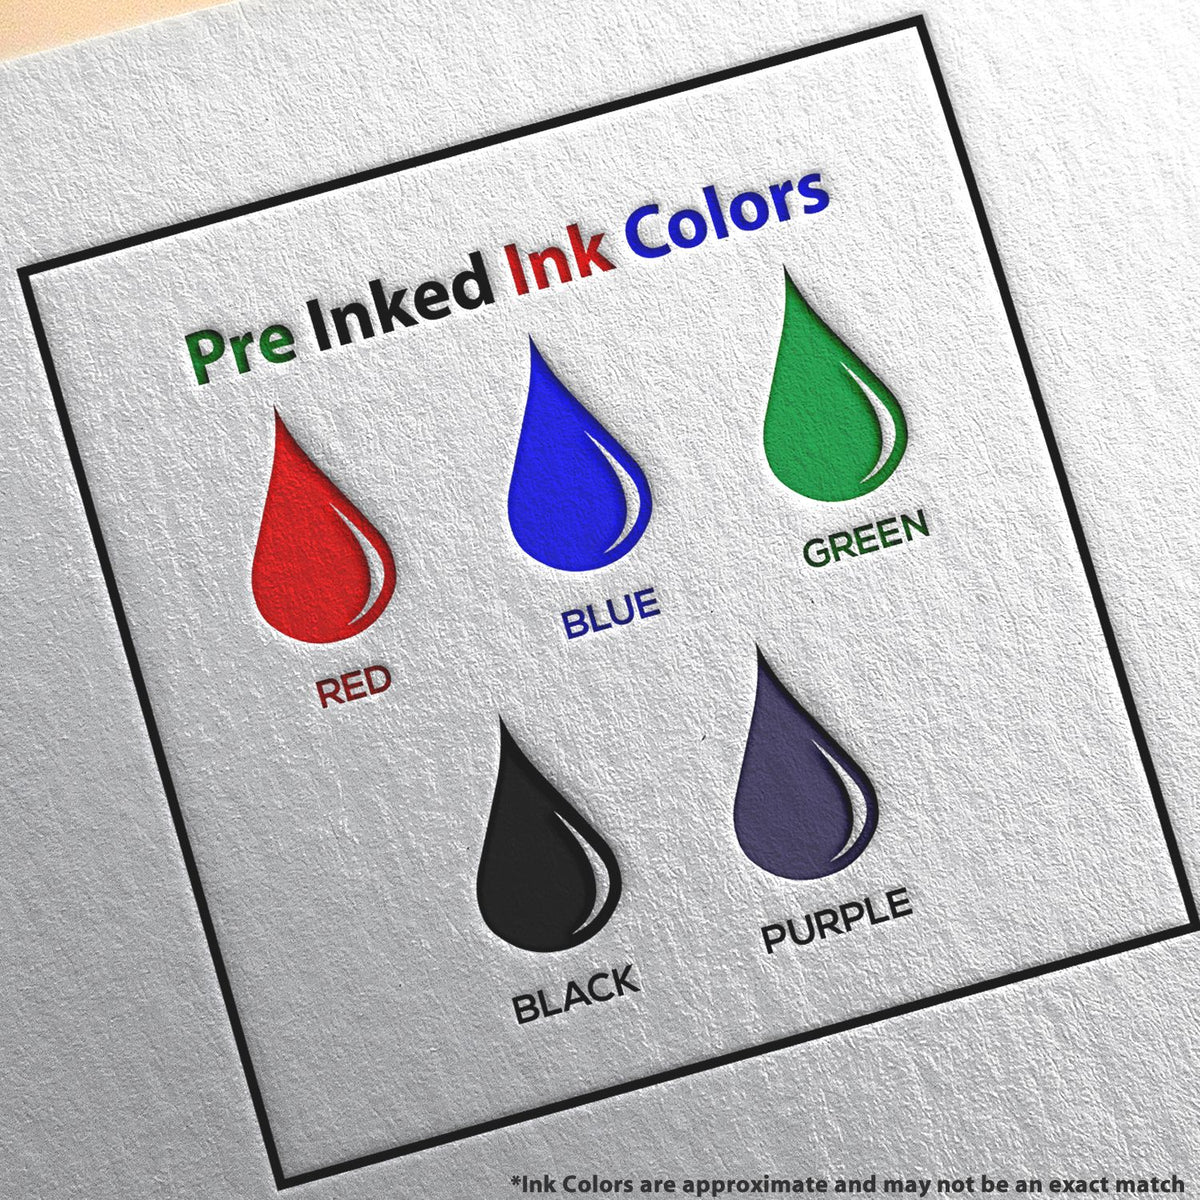 A picture showing the different ink colors or hues available for the Slim Pre-Inked New York Landscape Architect Seal Stamp product.